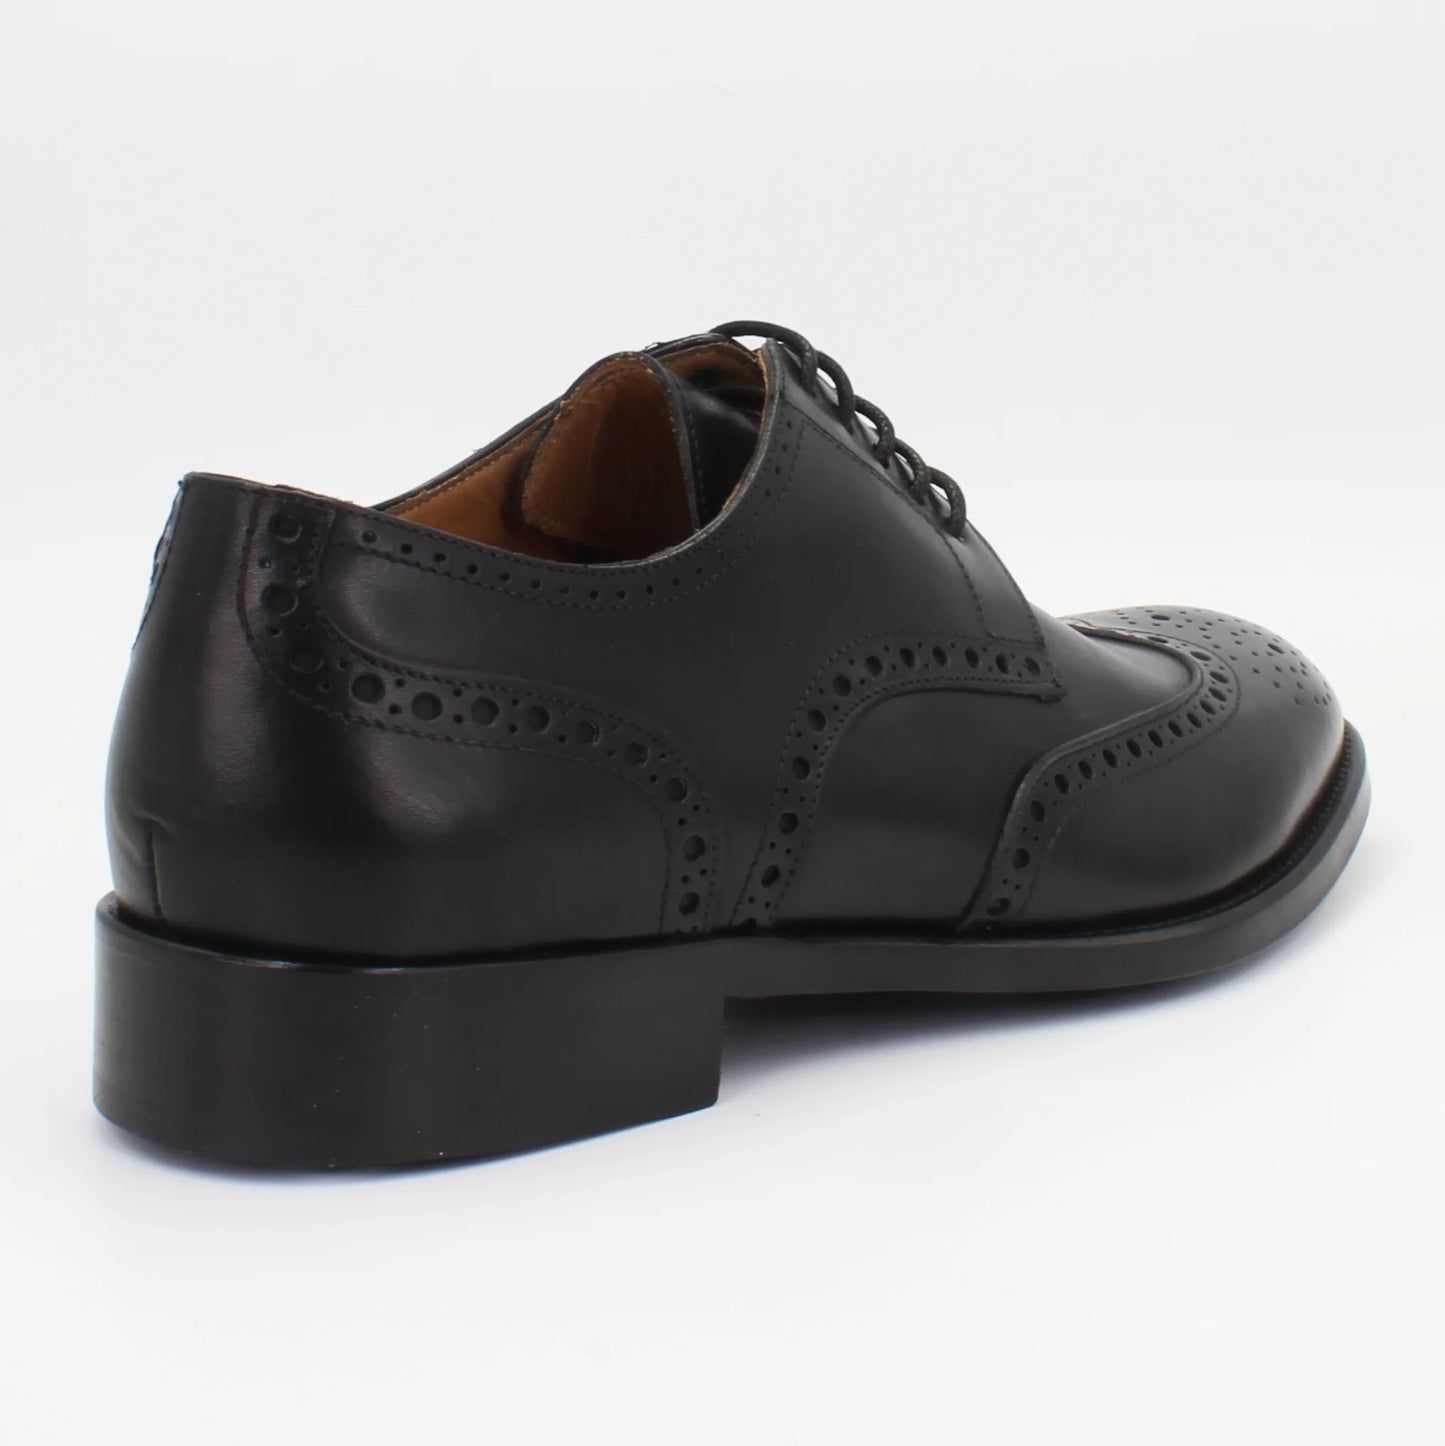 Shop Handmade Italian Leather Oxford in Nero (BRU11226)  or browse our range of hand-made Italian shoes in leather or suede in-store at Aliverti Cape Town, or shop online. We deliver in South Africa & offer multiple payment plans as well as accept multiple safe & secure payment methods.